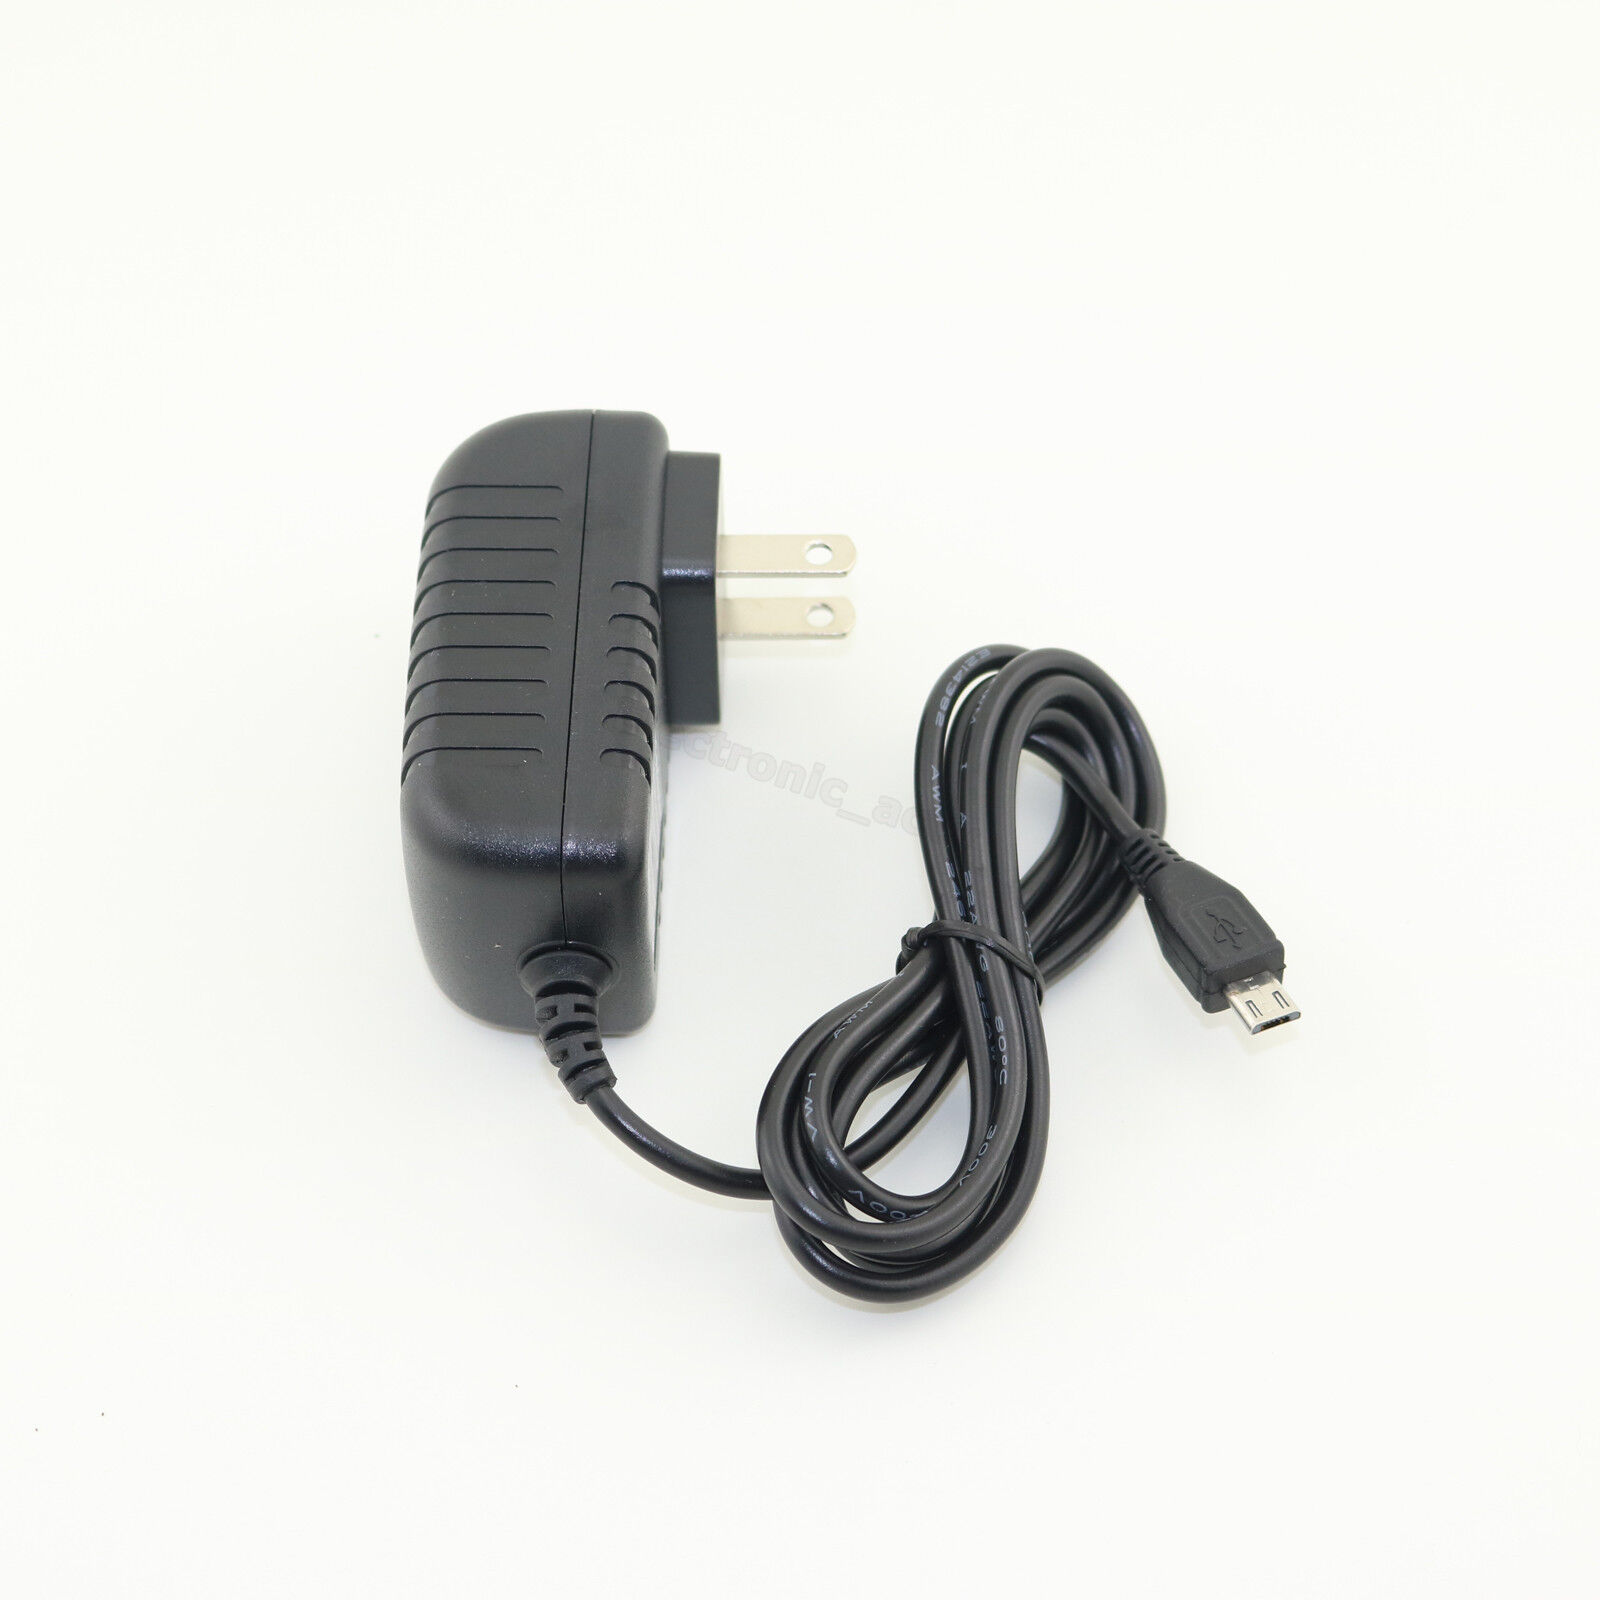 5V 2.5A Micro USB Power Converter Adapter Wall Charger for Raspberry Pi B+ 2 3 Type: AC/DC Adapter MPN: Does Not App